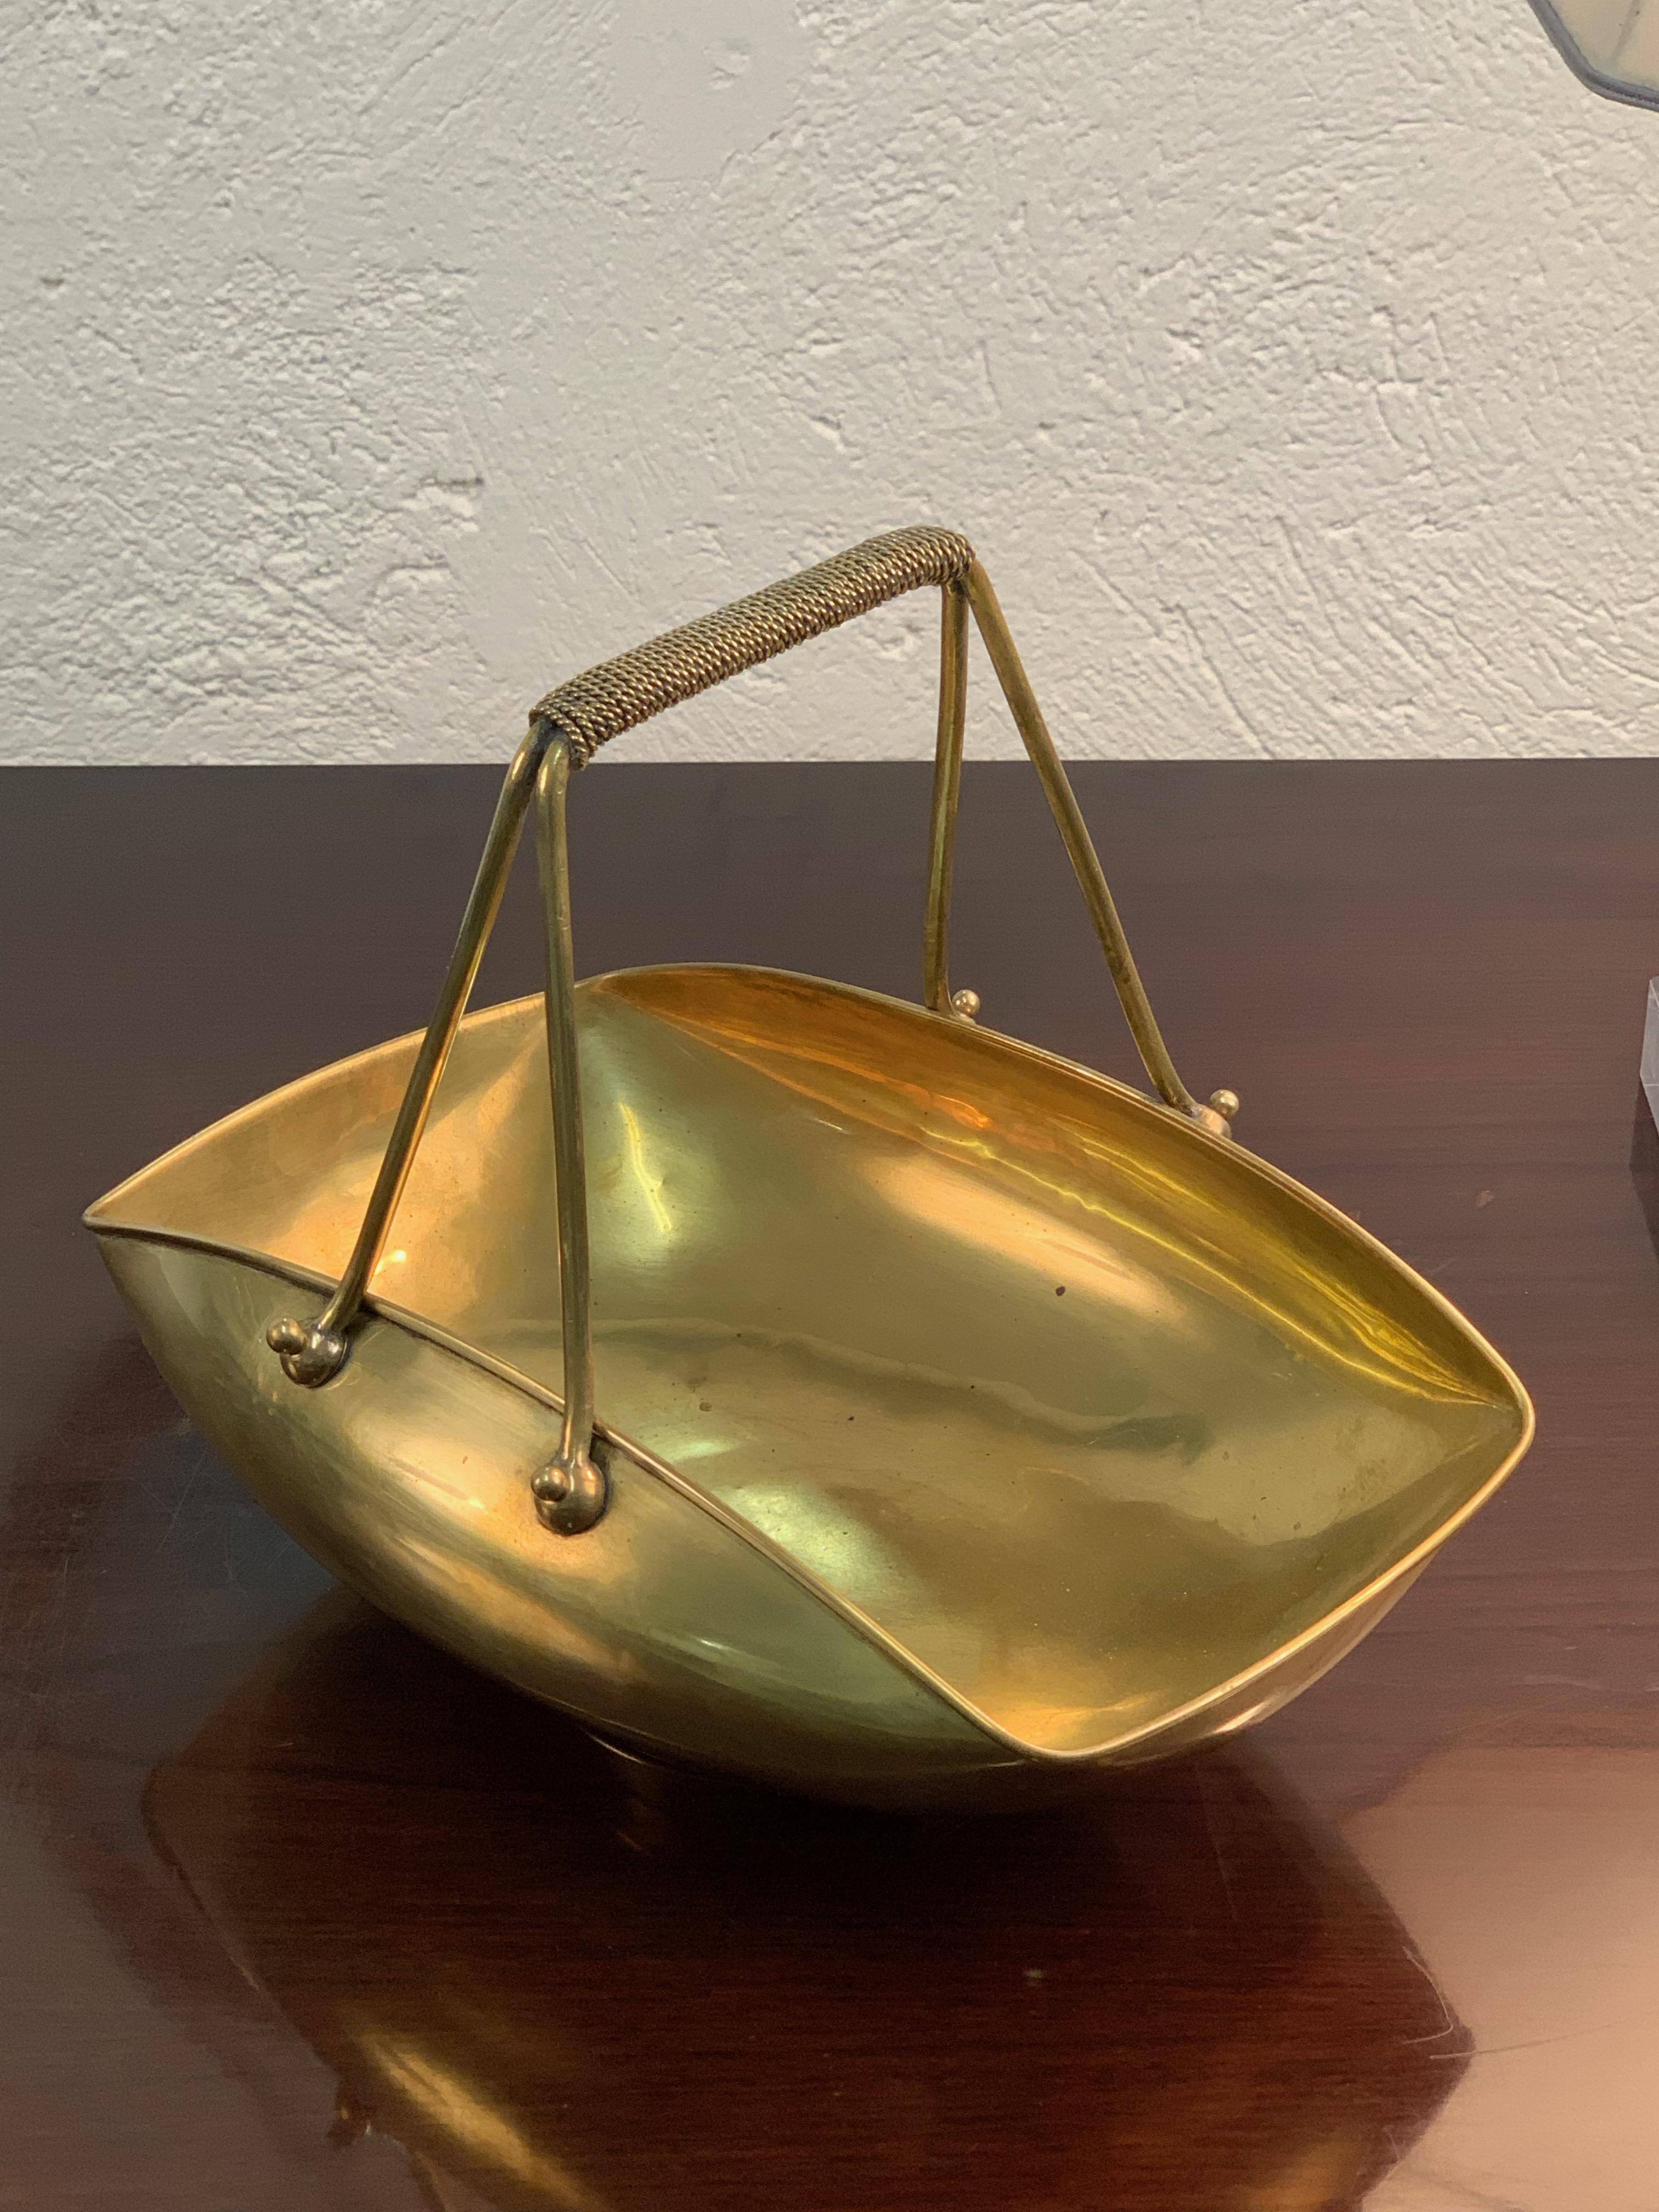 Elegant Italian centerpiece from the 1950s. Finished very well. The handle has a brass string that accentuates the beauty of the work.
Good condition.
 